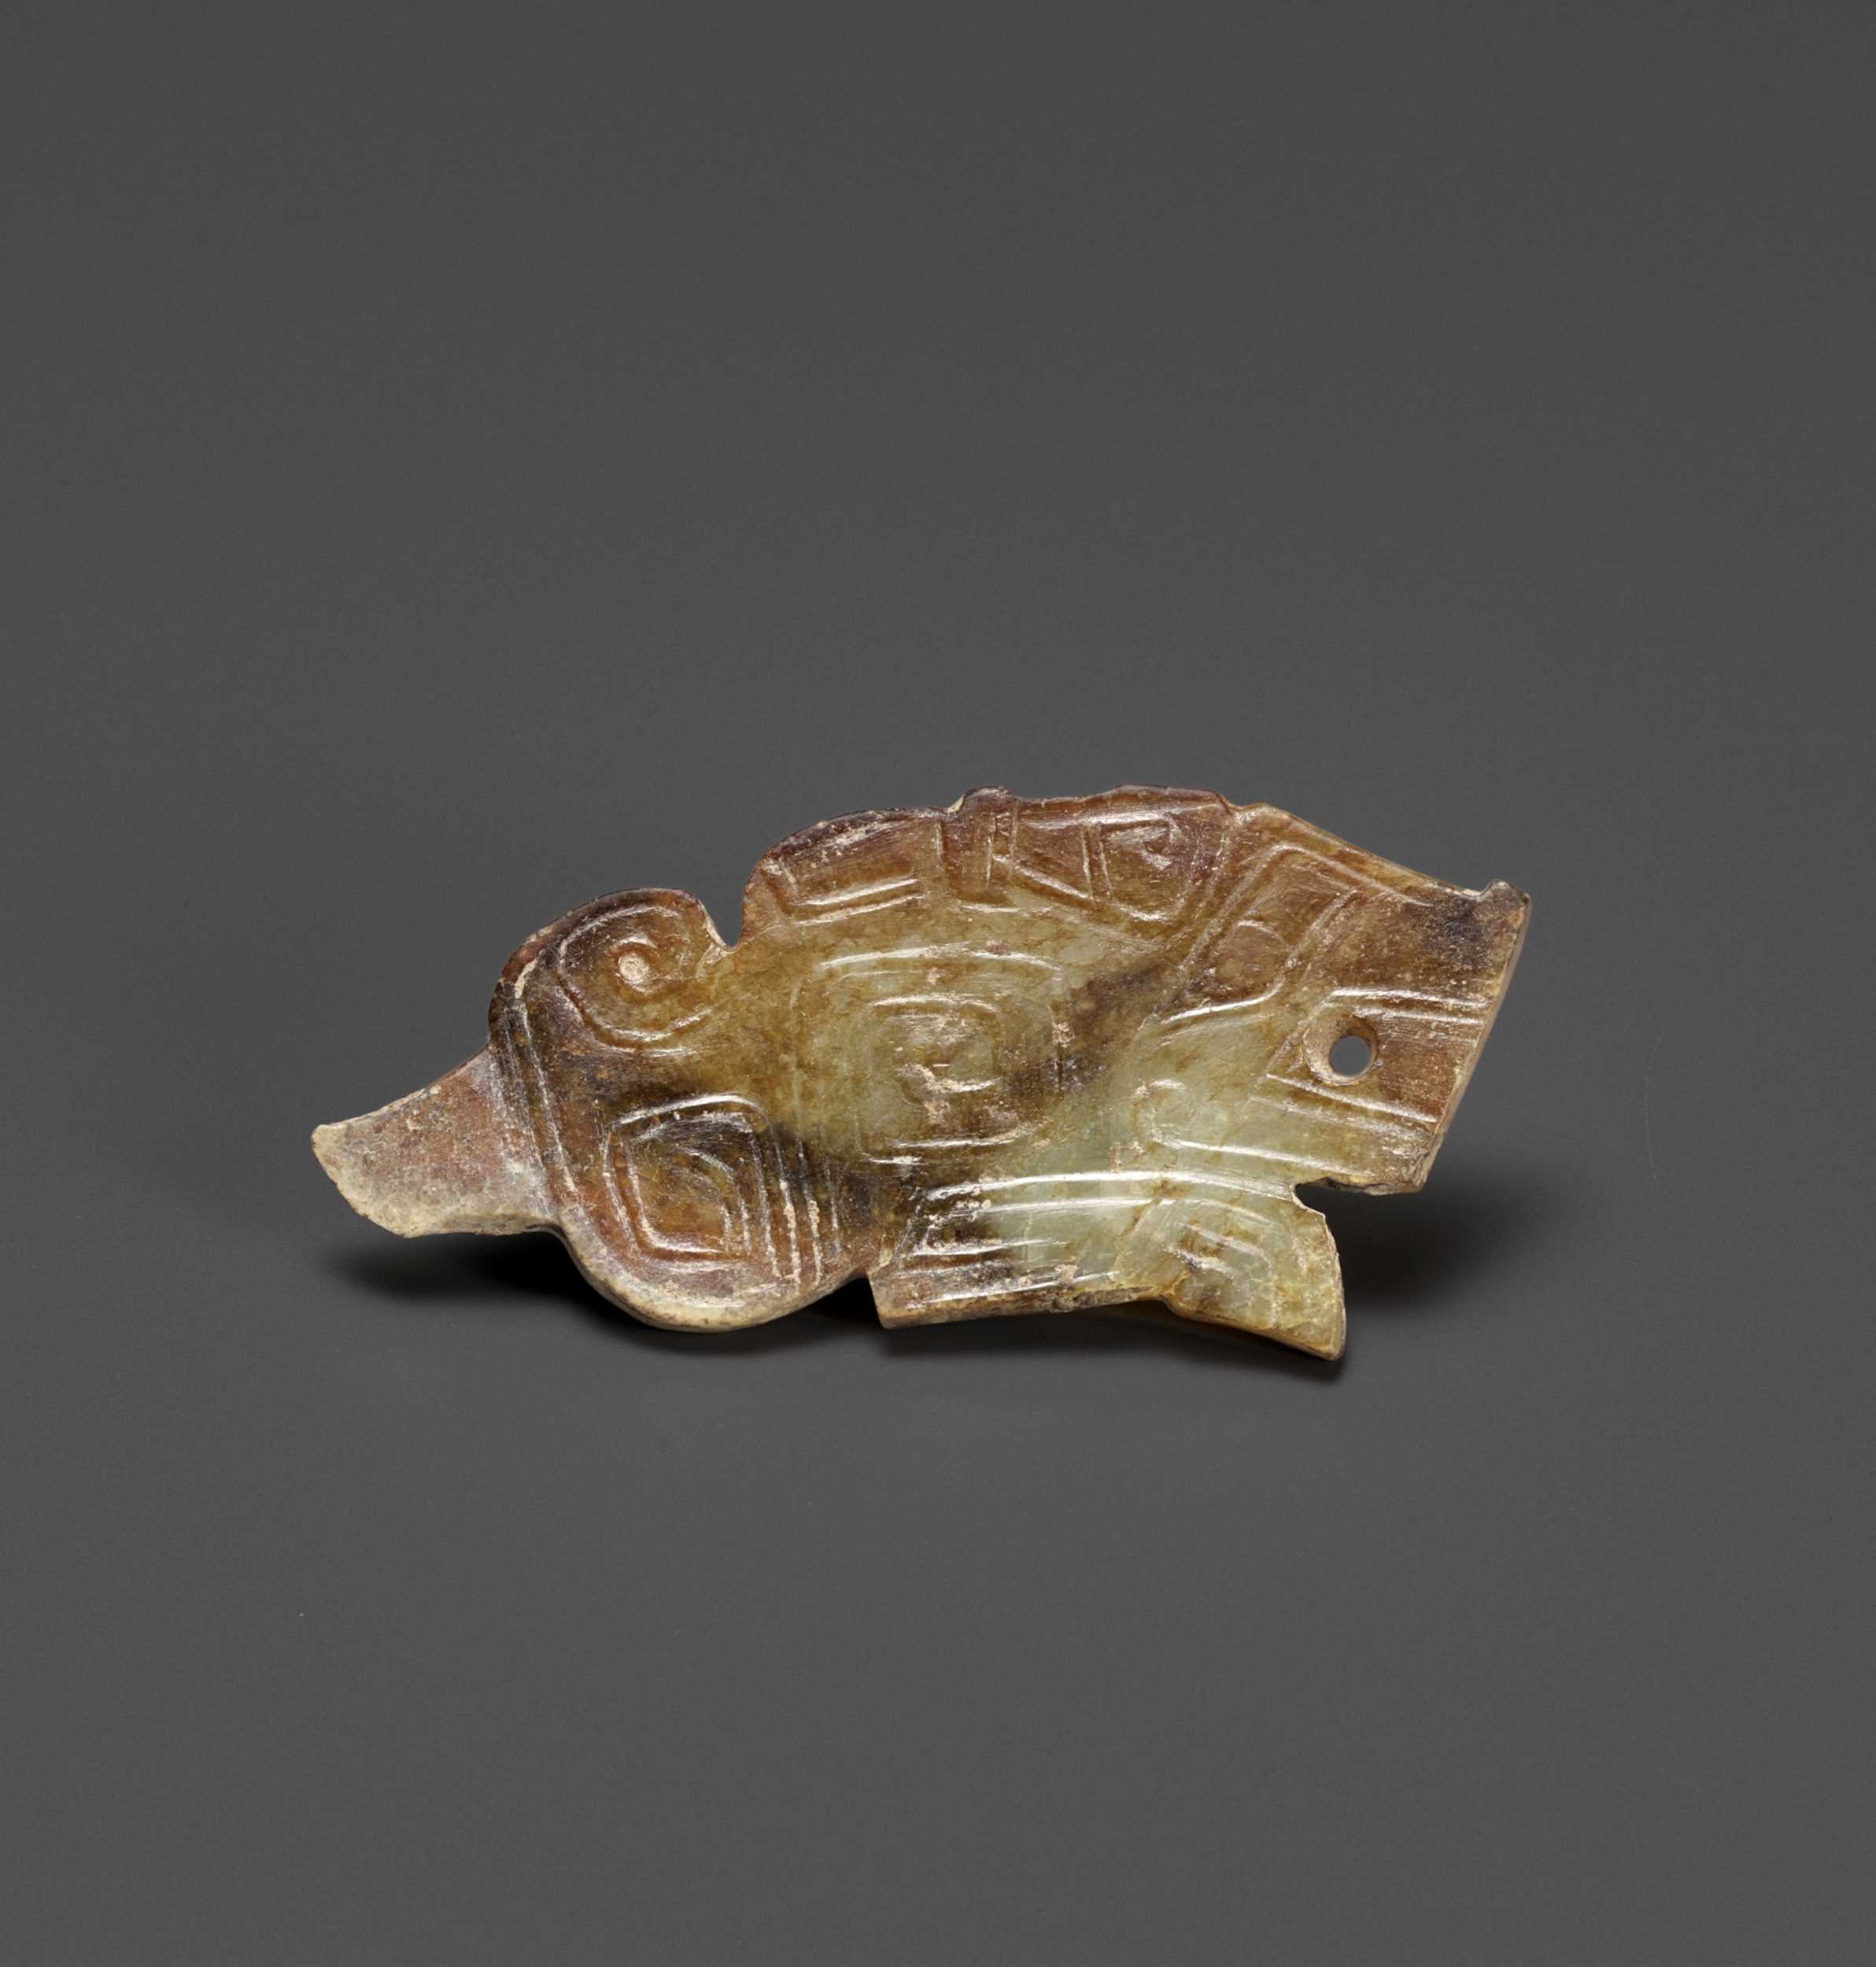 Lot 34 - A TIGER-FORM JADE PENDANT, LATE SHANG DYNASTY